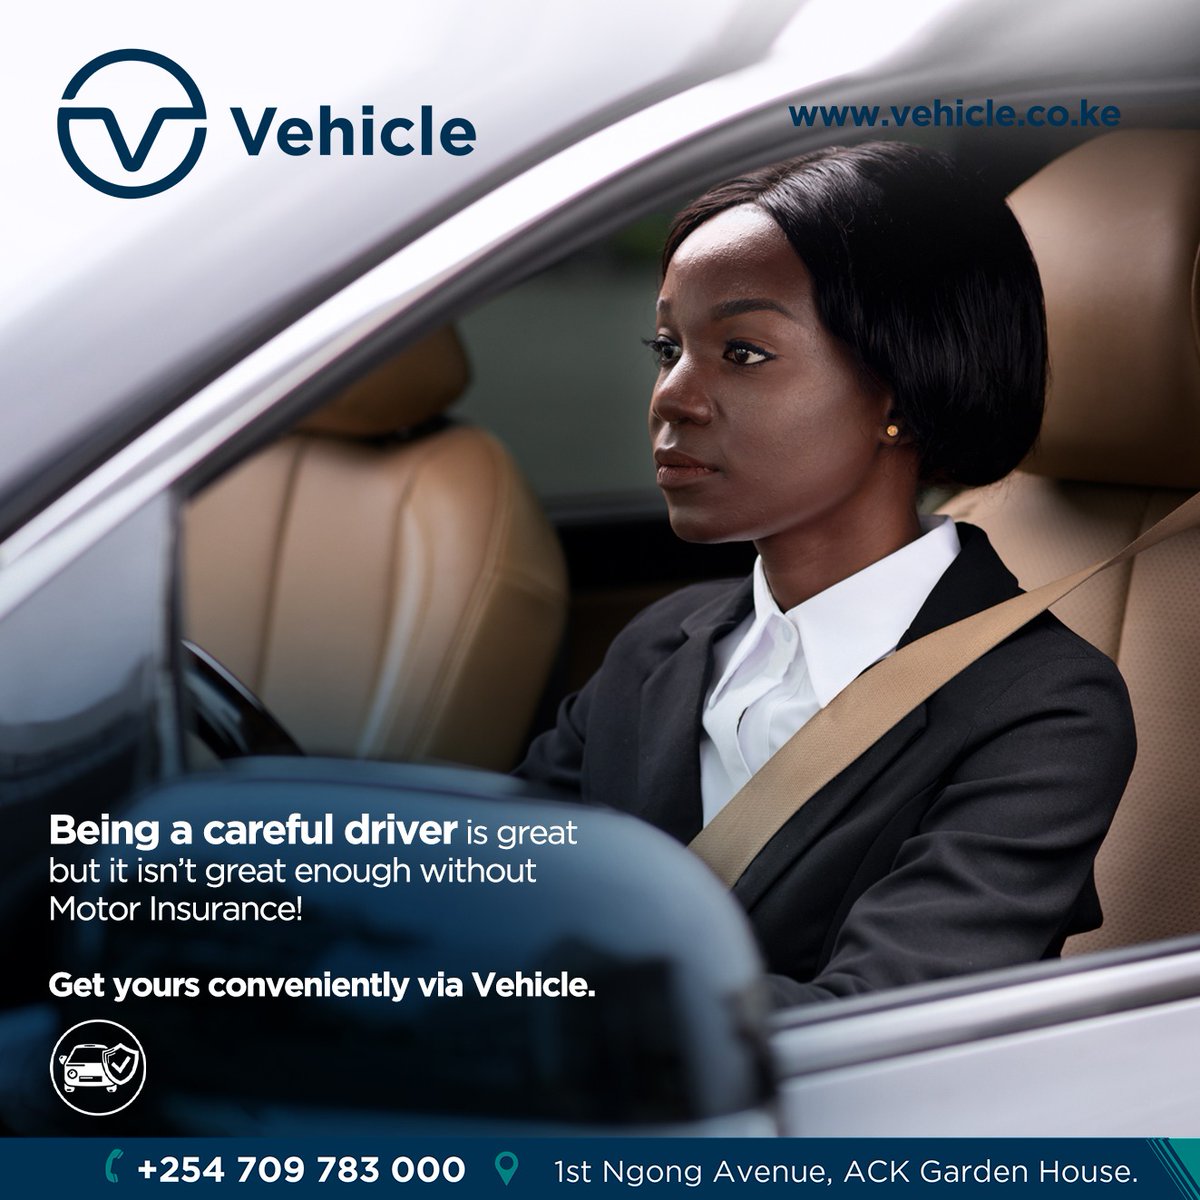 What is being a good driver without Motor insurance?  

You can get one conveniently via insure.vehicle.co.ke and many options available for you.  

#vehicleinsurance #Insurancecoverage #RevvedUp #ComprehensiveInsurance #RoadRage